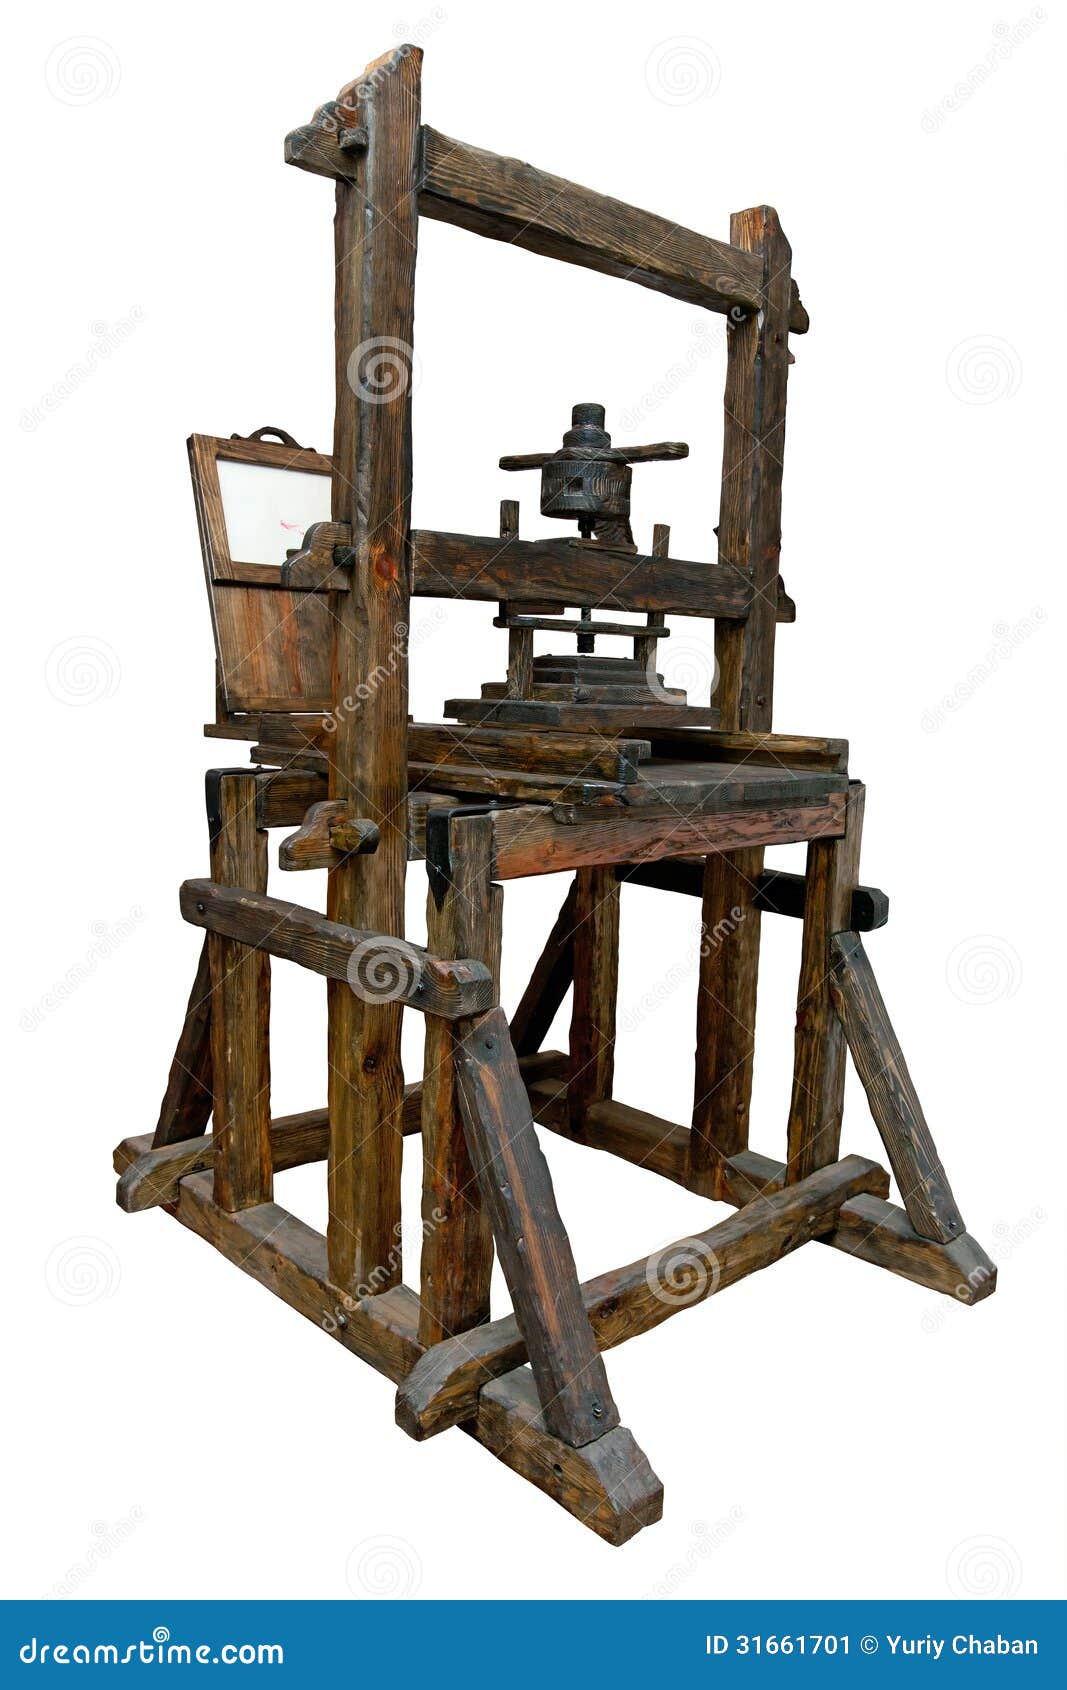 Old wooden printing press stock image. Image of craft - 31661701